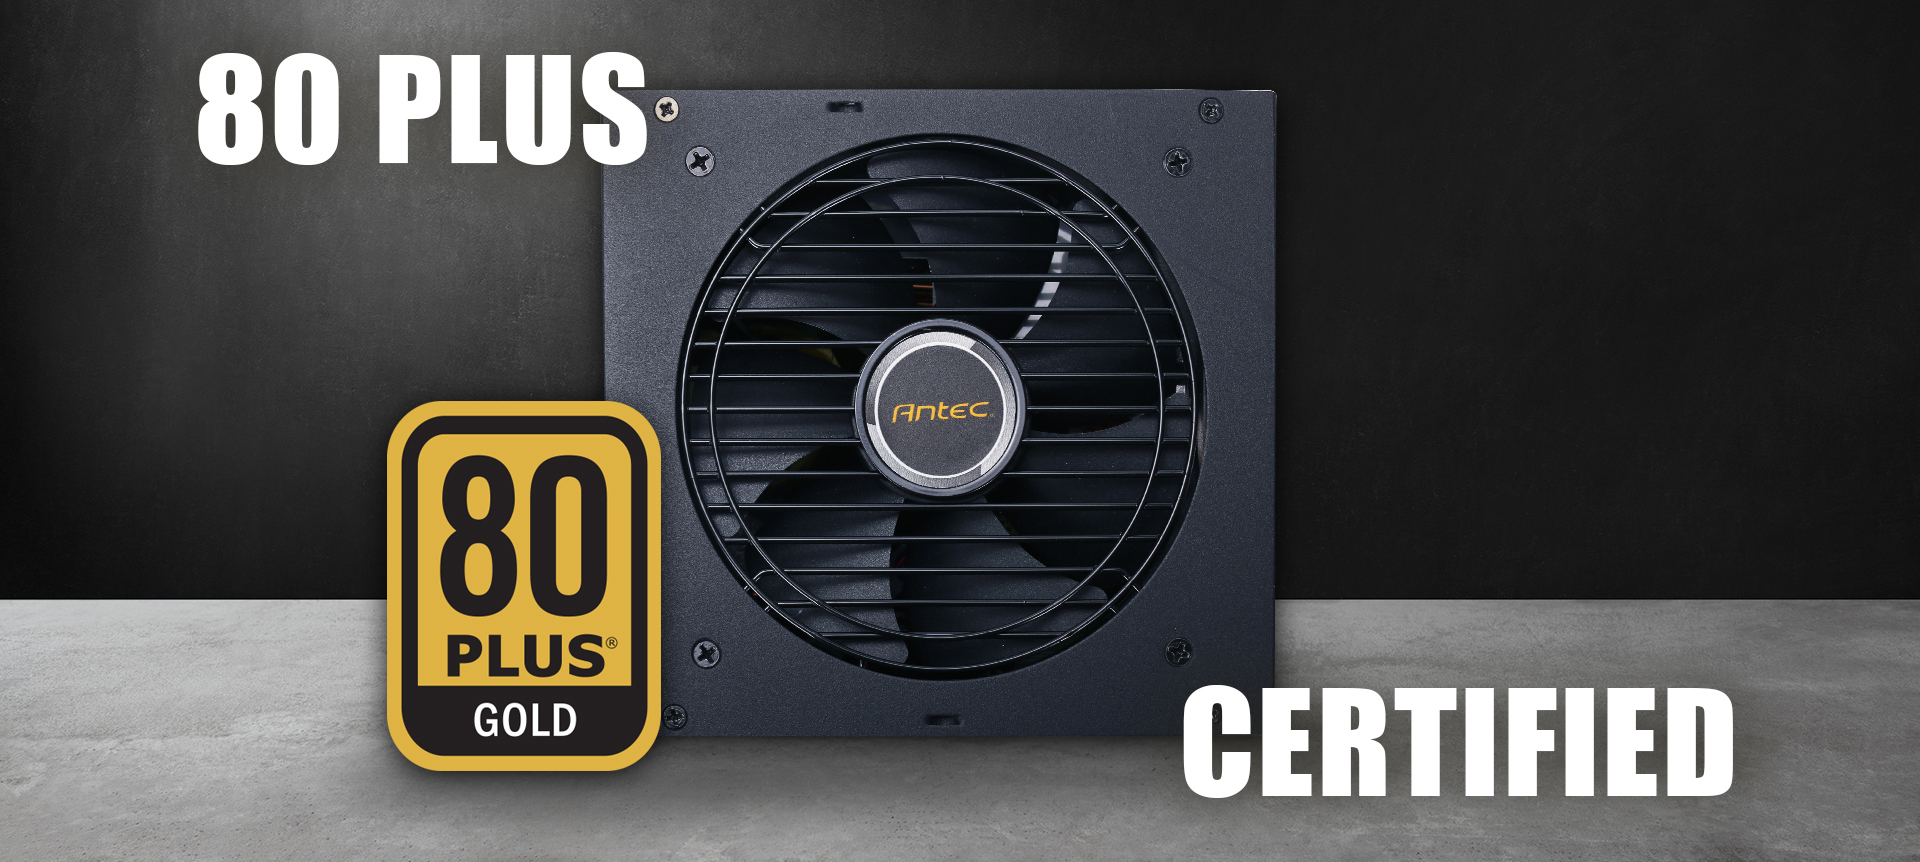 Antec NeoECO 750 GOLD PSU Standing Up, Facing Forward Next to the 80 PLUS GOLD Badge